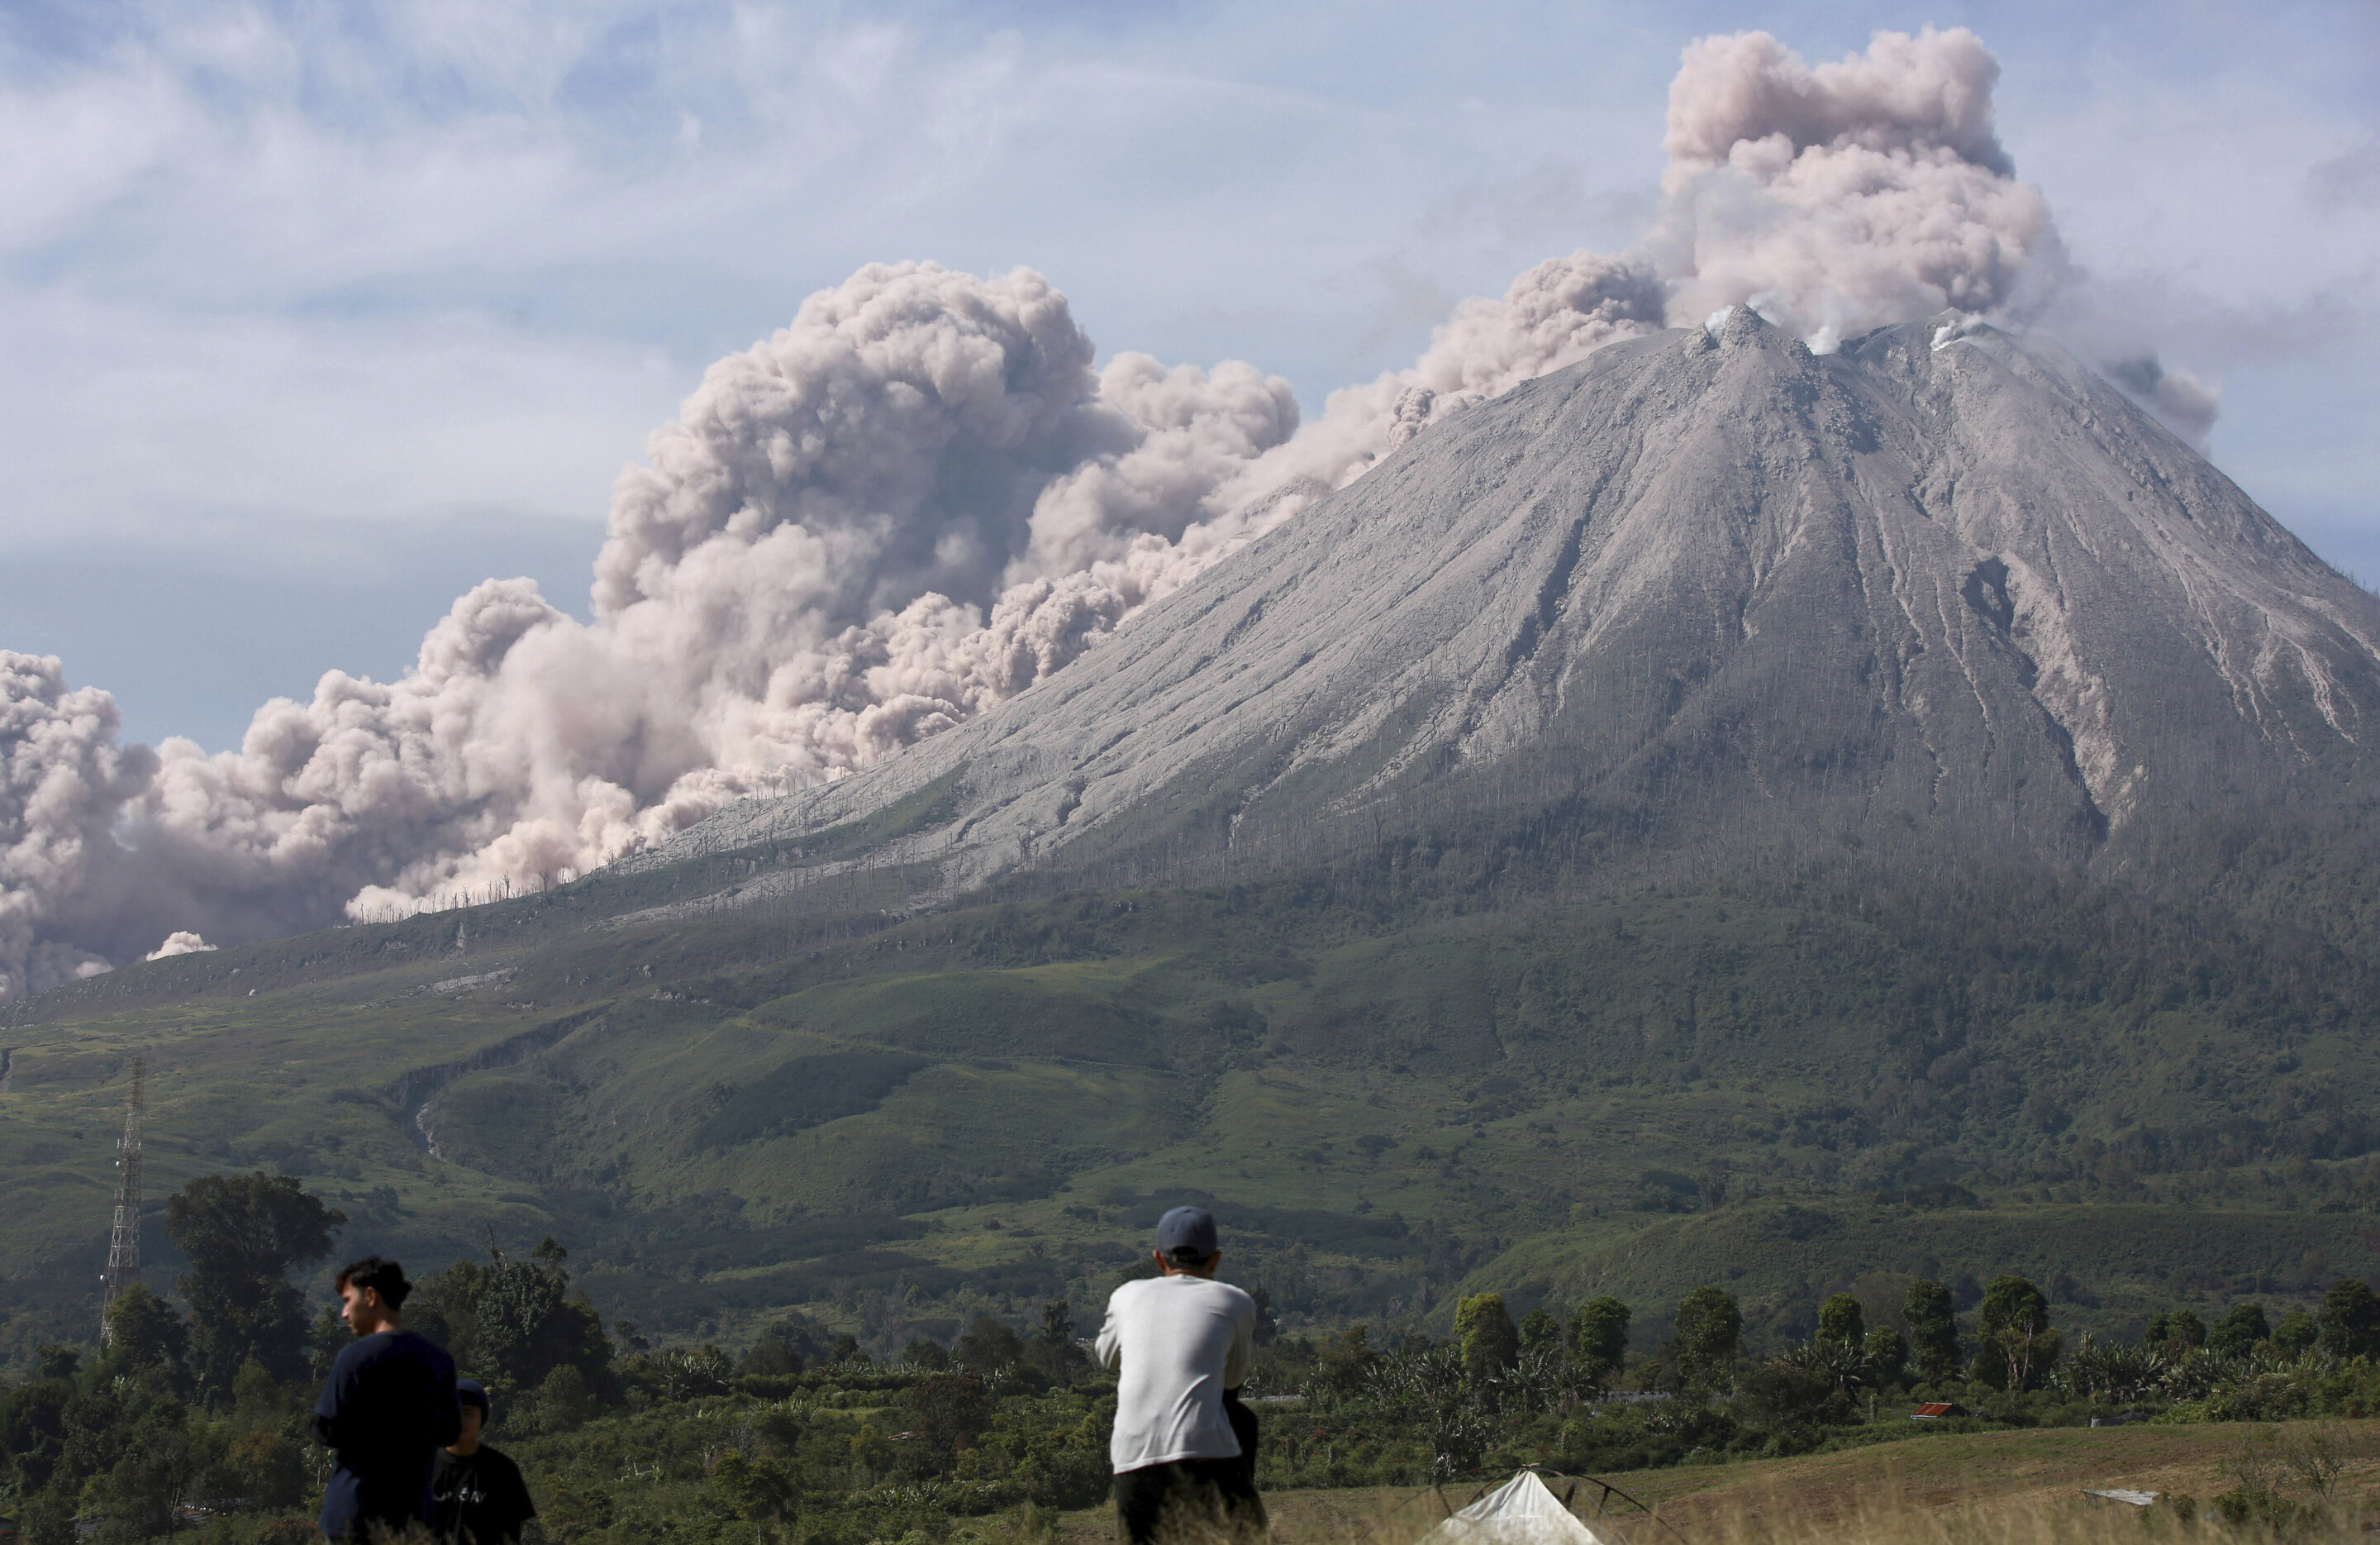 Sinabung volcano in Indonesia releases a new explosion of hot ash